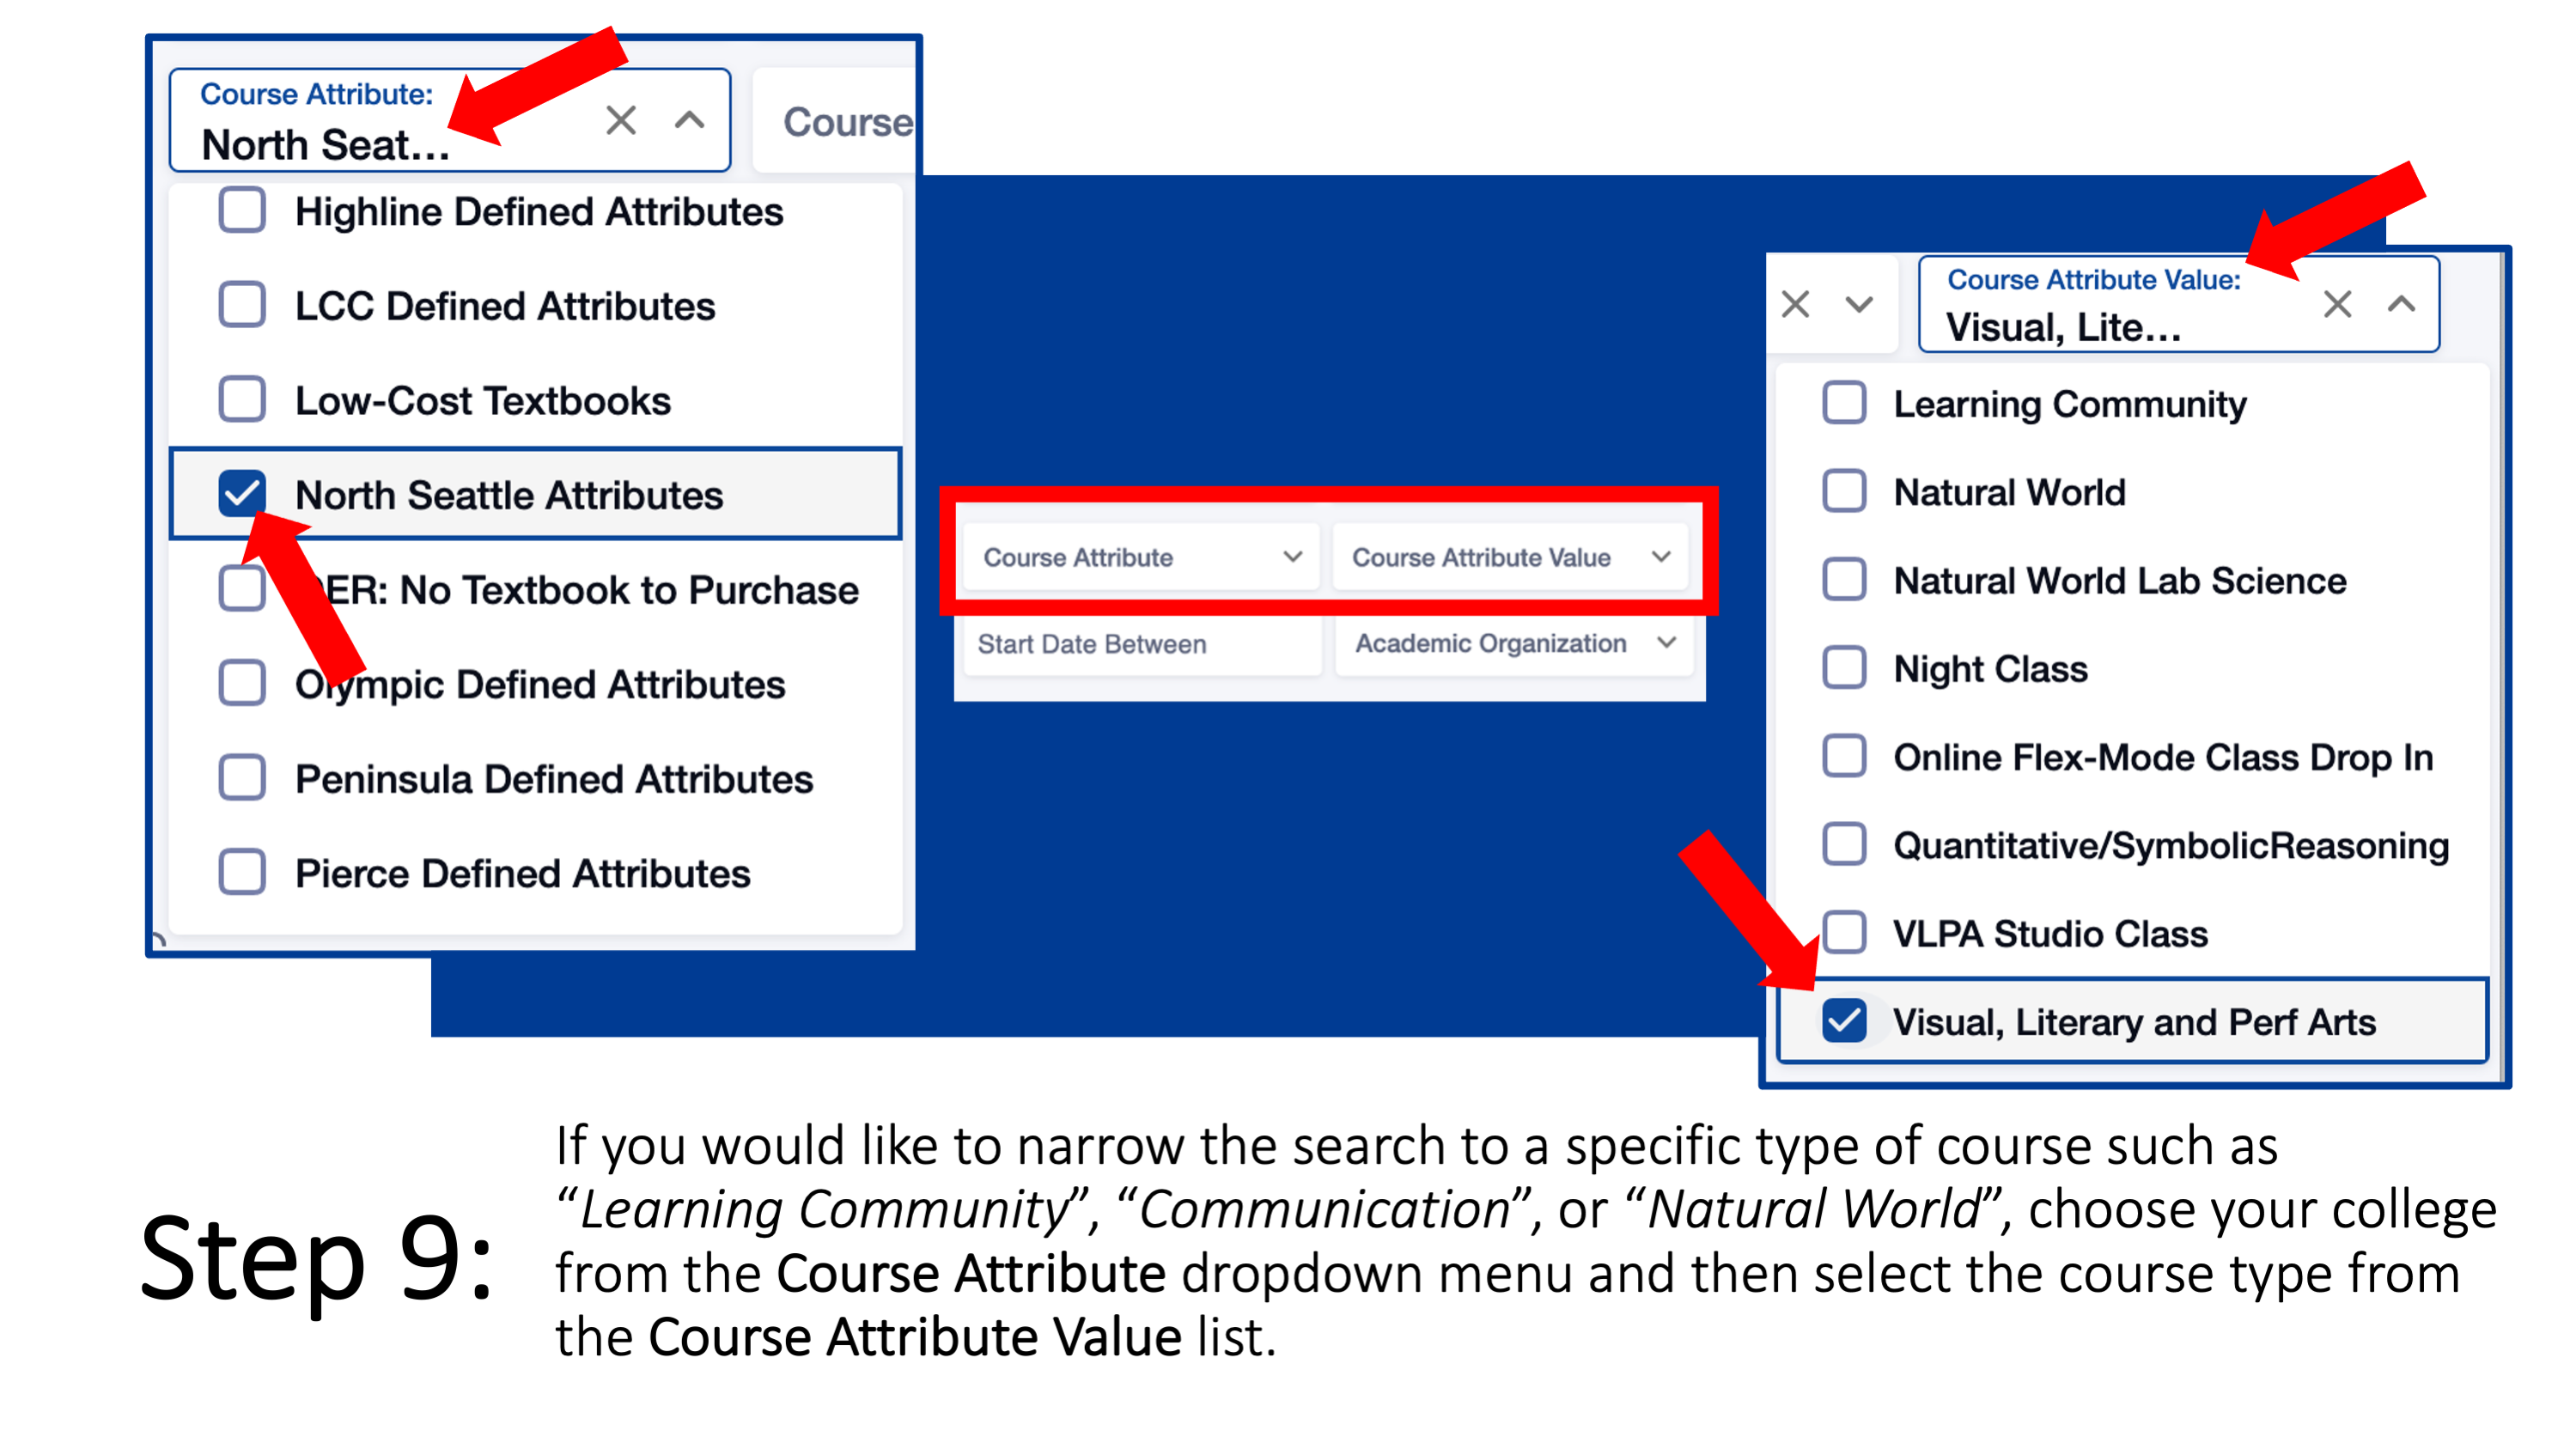 Step 9: If you would like to narrow the search to a specific type of course such as “Learning Community”, “Communication”, or “Natural World”, choose your college from the Course Attribute dropdown menu and then select the course type from the Course Attribute Value list. Check the Show Open Classes Only box to see ONLY OPEN CLASSES. Leave it unchecked to see open and closed (full) classes.